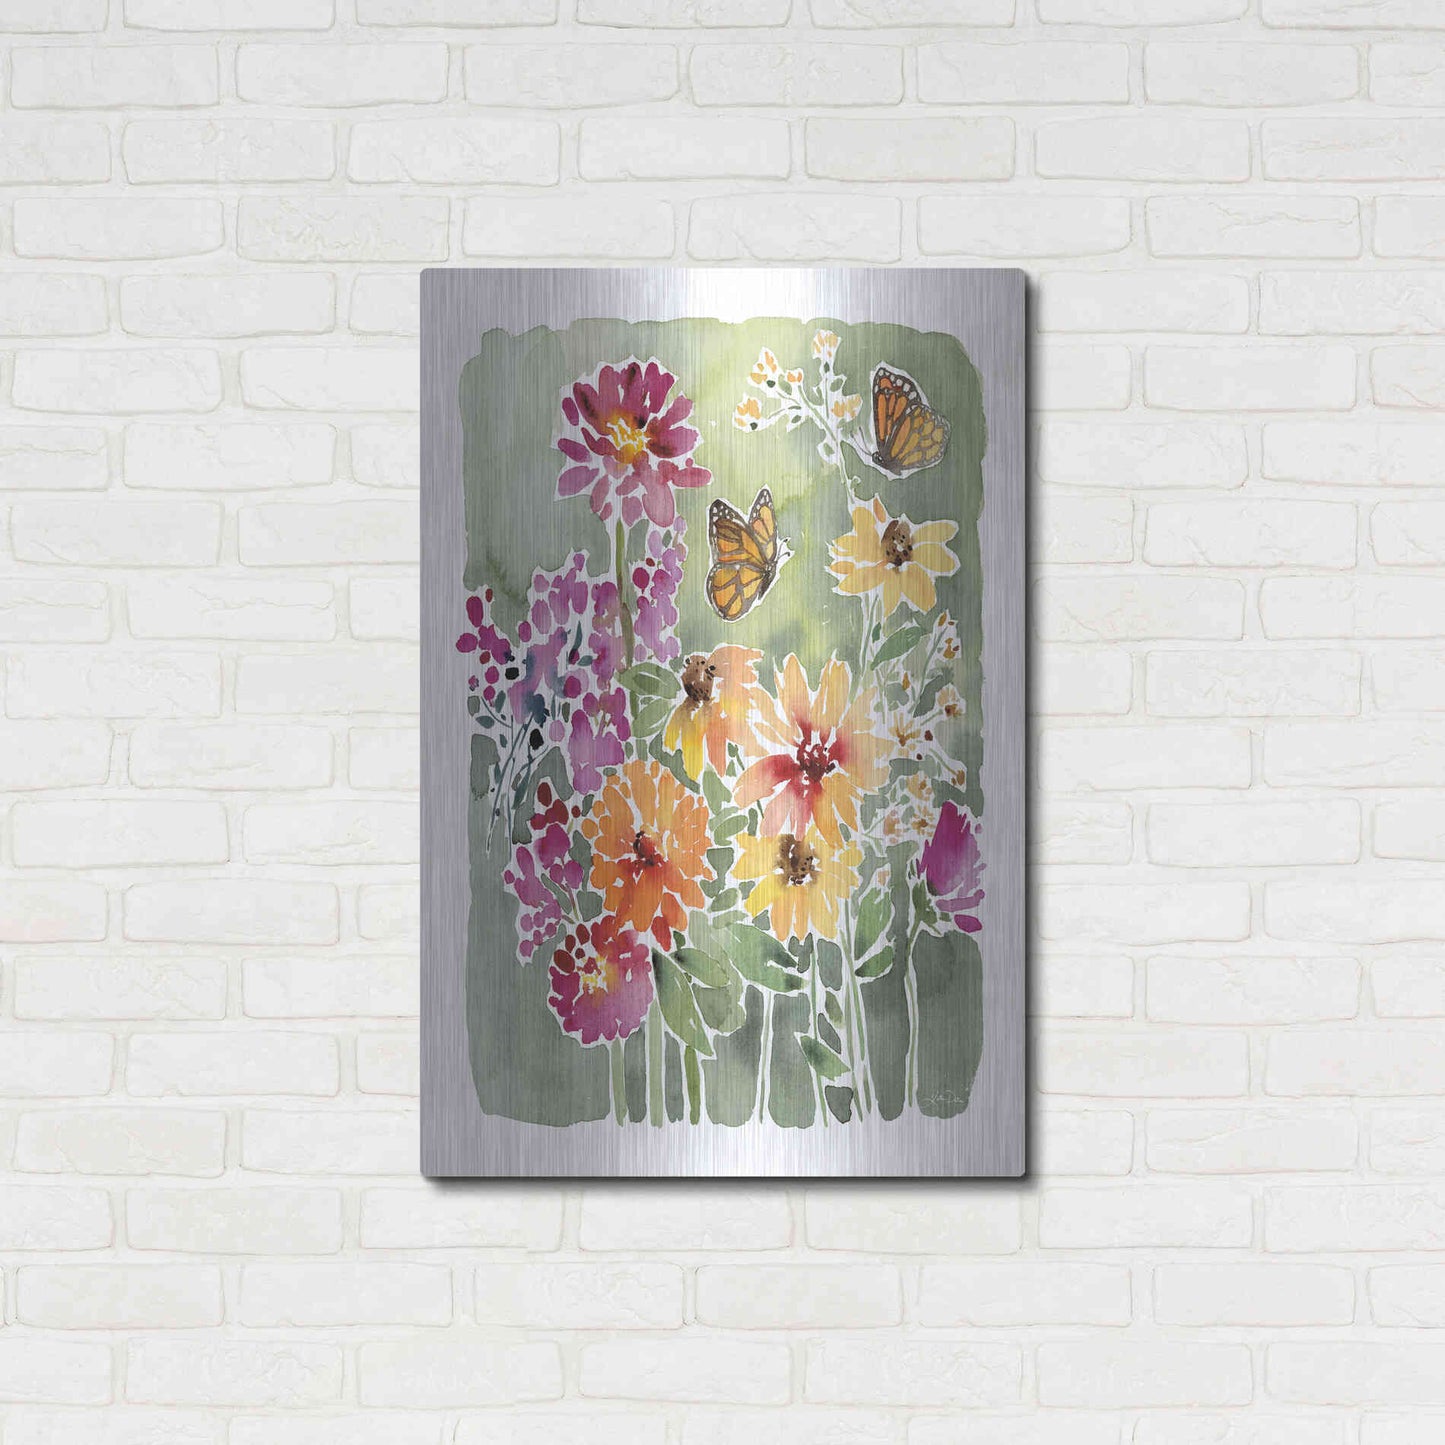 Luxe Metal Art 'Monarchs and Blooms' by Katrina Pete, Metal Wall Art,24x36